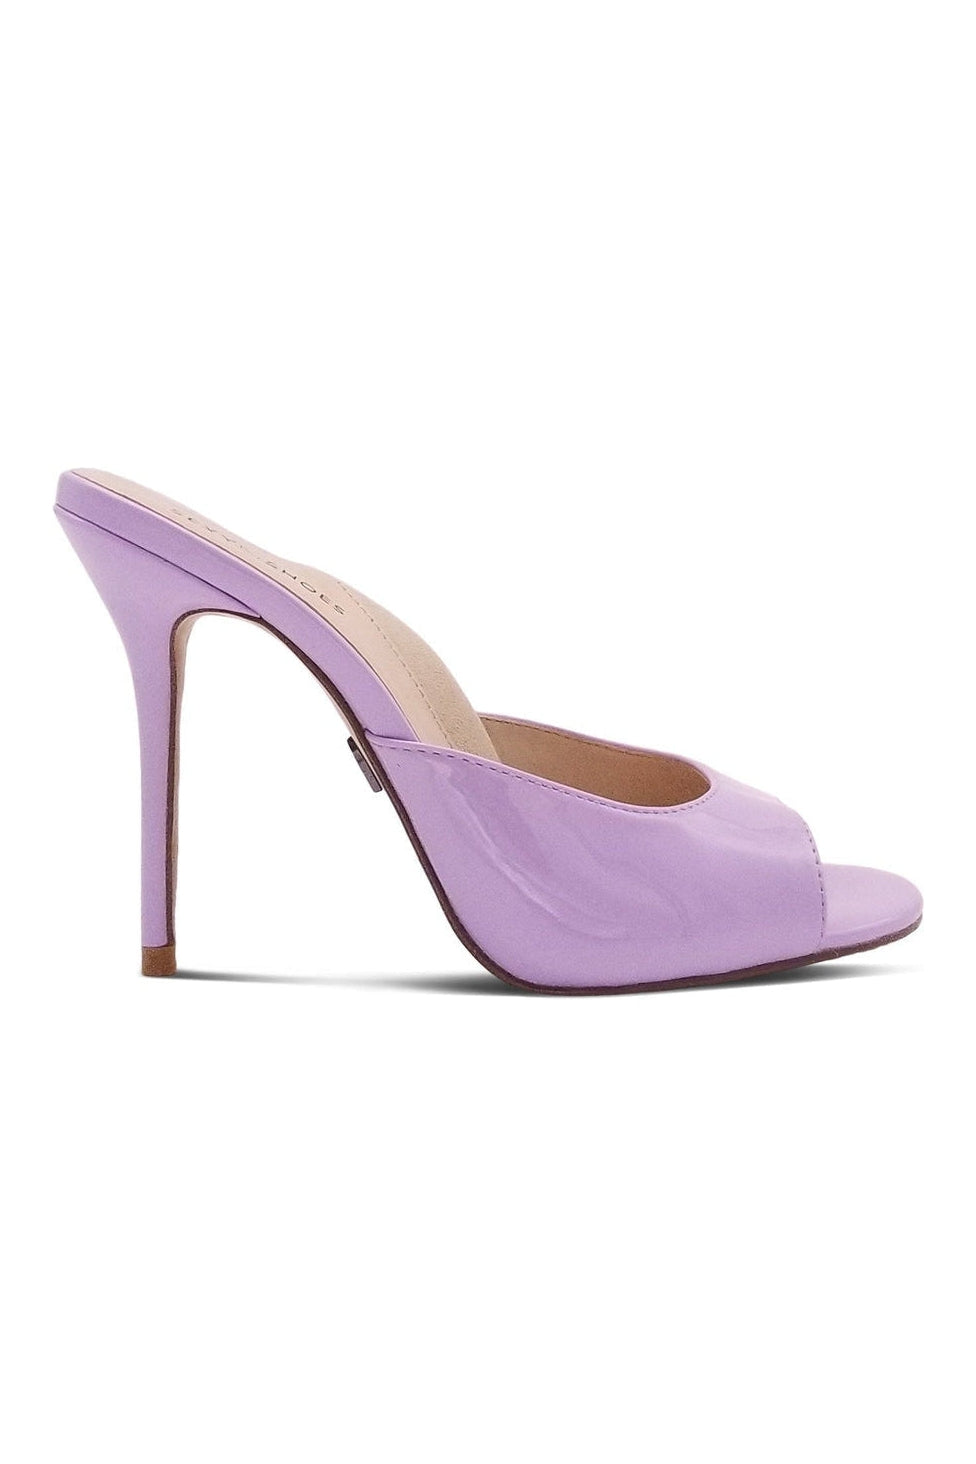 Micro Stiletto Sexy Mule-Slides-Sexyshoes Signature-Lavender-SEXYSHOES.COM